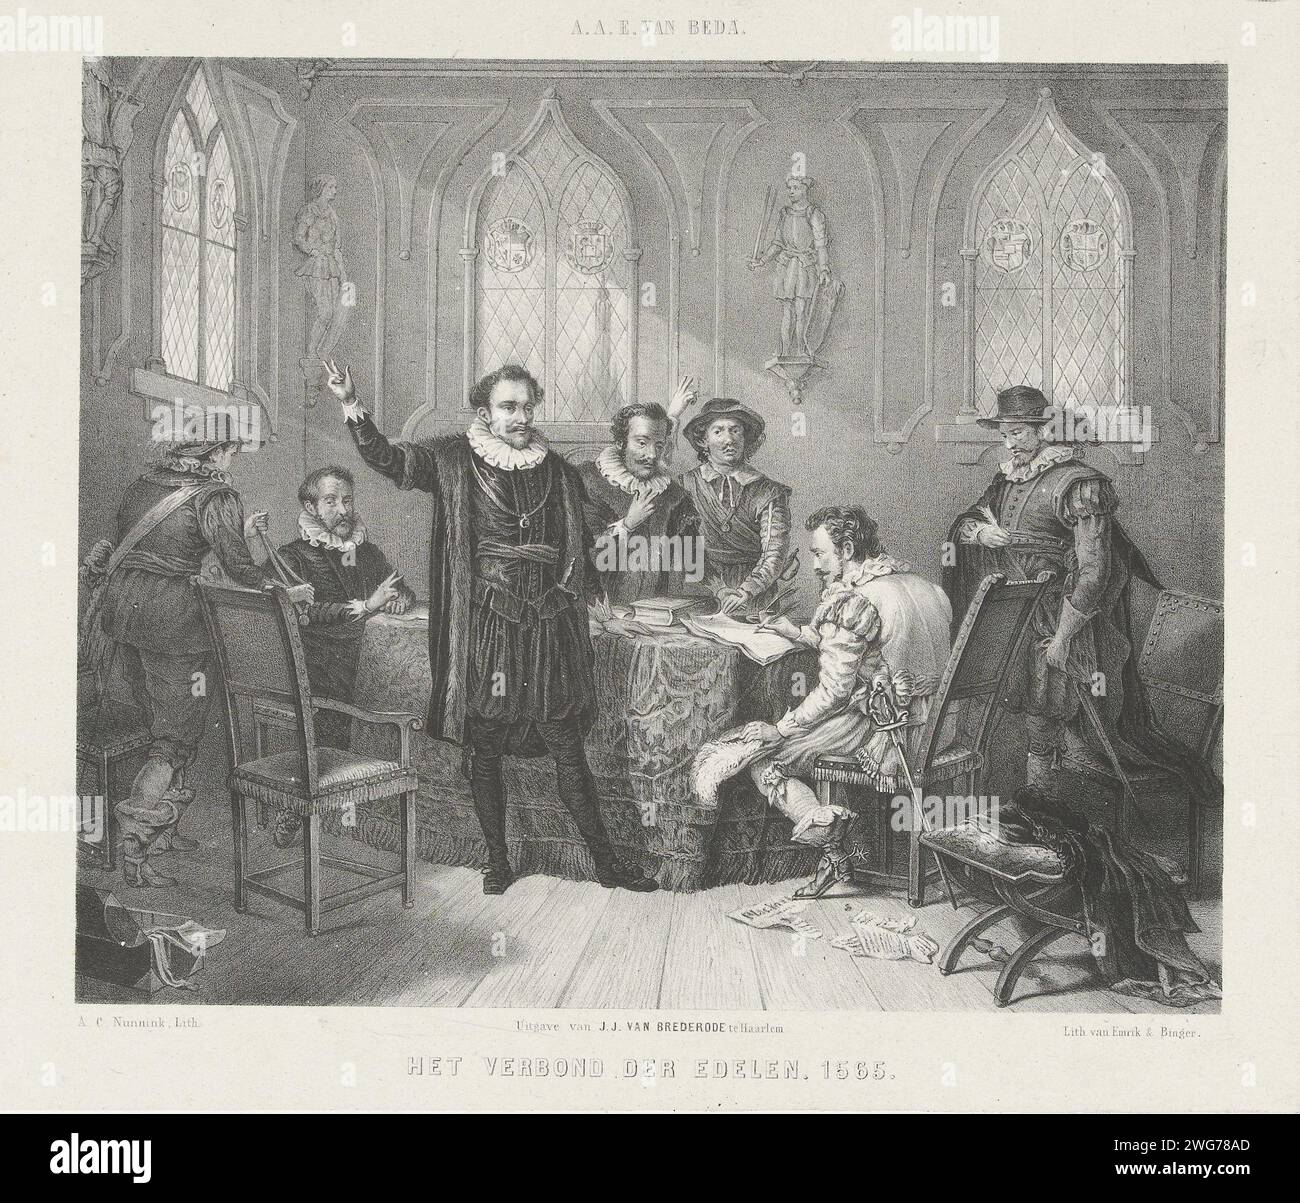 The Covenant of the Nobles, 1565, 1823 - 1894 print The Covenant of the Nobles on the castle of Hendrik van Brederode in Vianen, 1565. A few nobles collected around a table on which a document is drawn up. In the middle a standing man who takes an oath with a raised hand. print maker: Netherlandspublisher: Haarlem paper  alliance, league, union, foedus. swearing an oath (with two fingers raised) Stock Photo